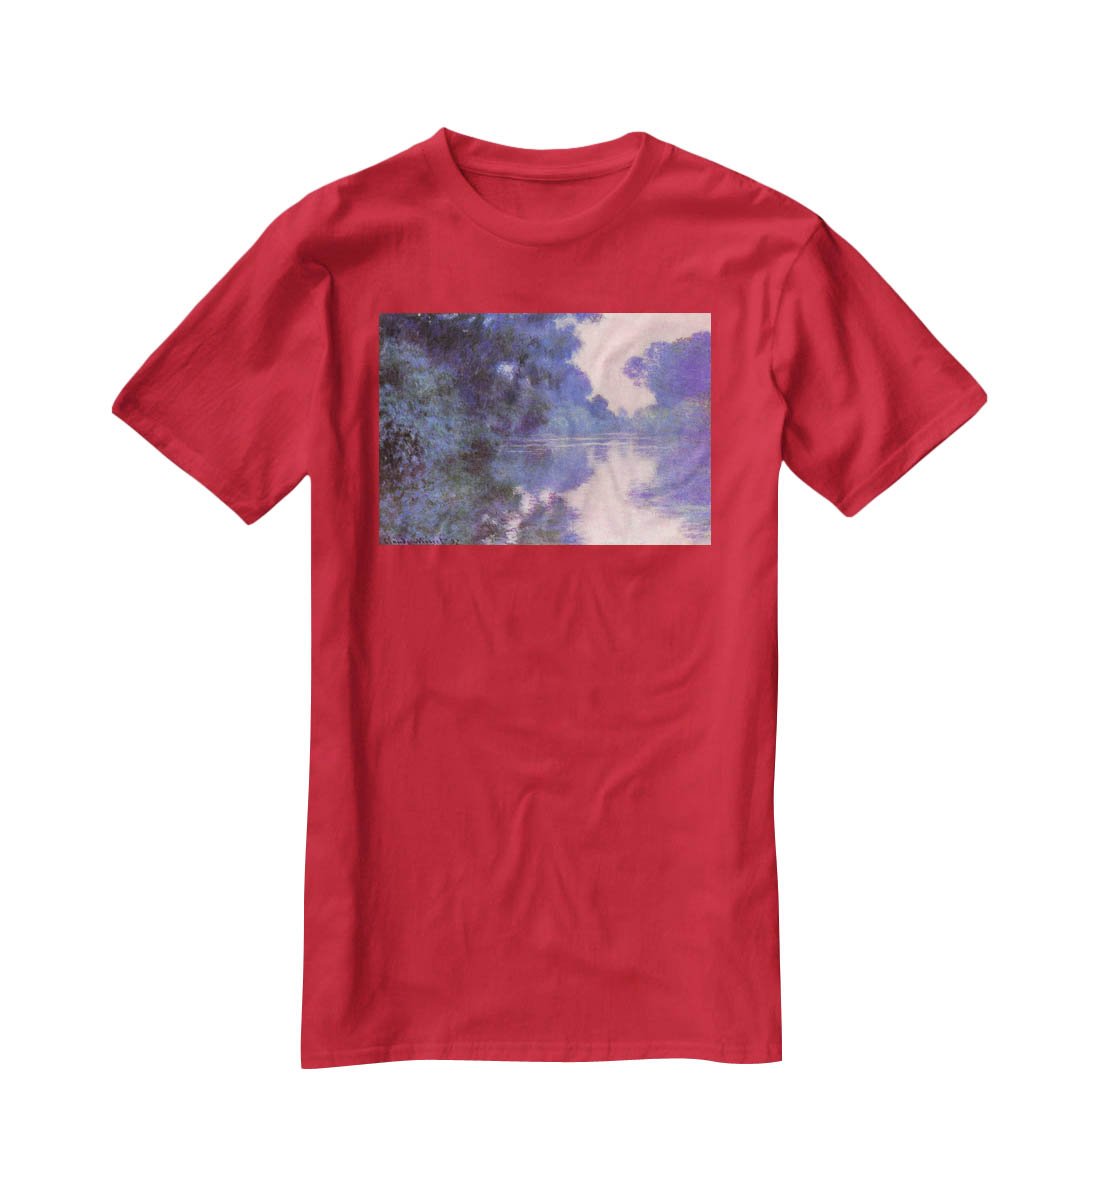 Seine arm at Giverny by Monet T-Shirt - Canvas Art Rocks - 4